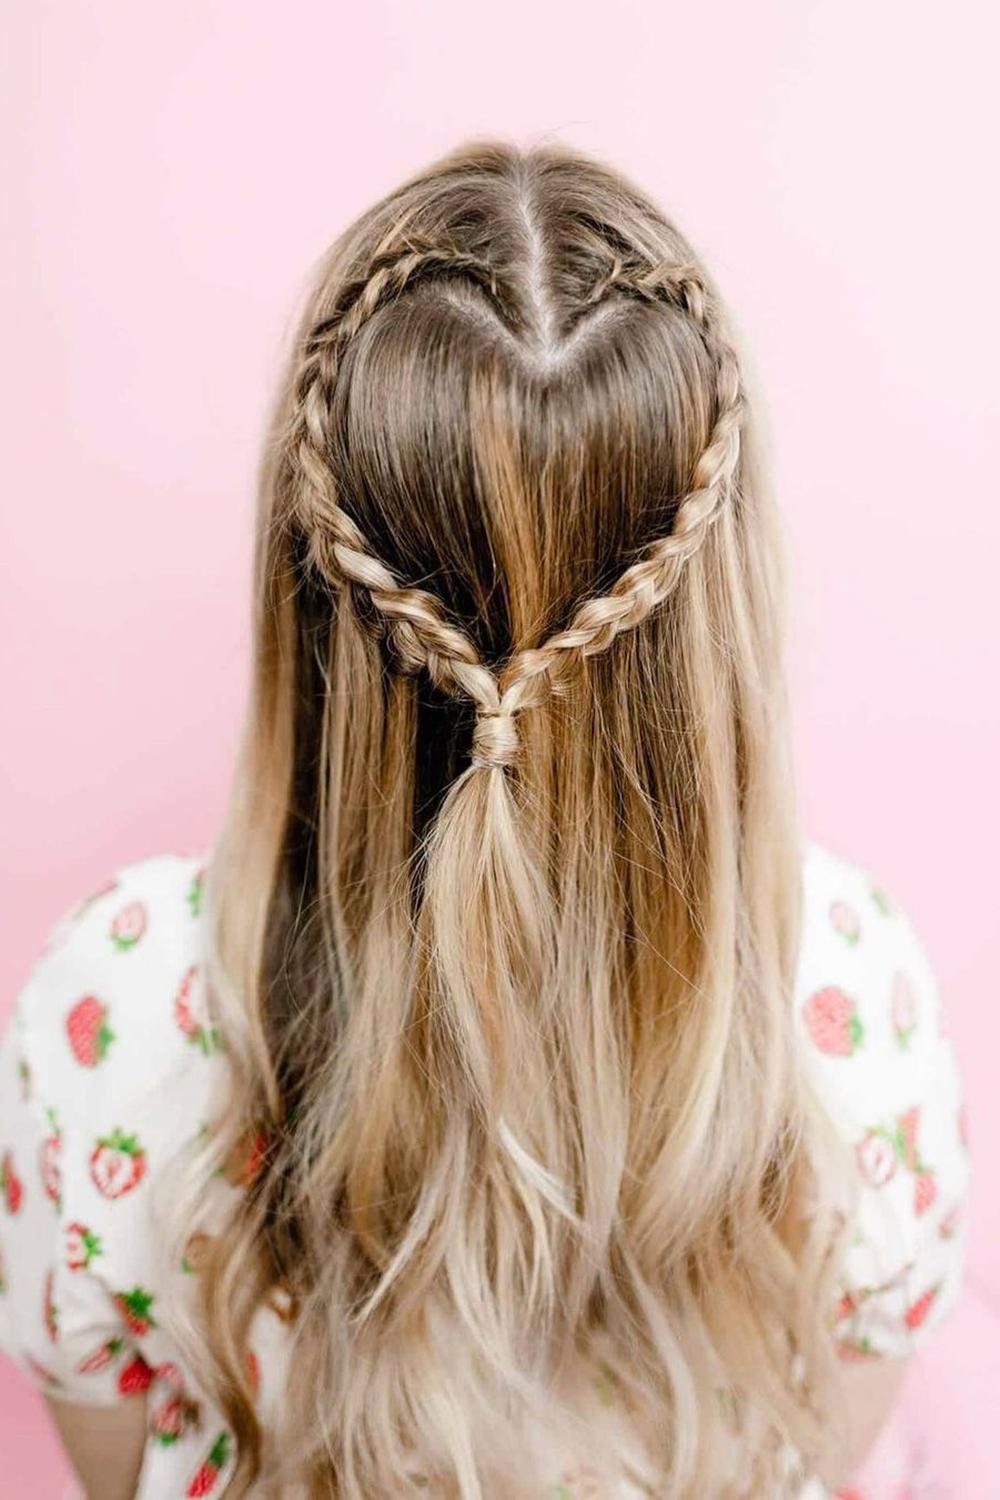 9 - Picture of Braided Hairstyles